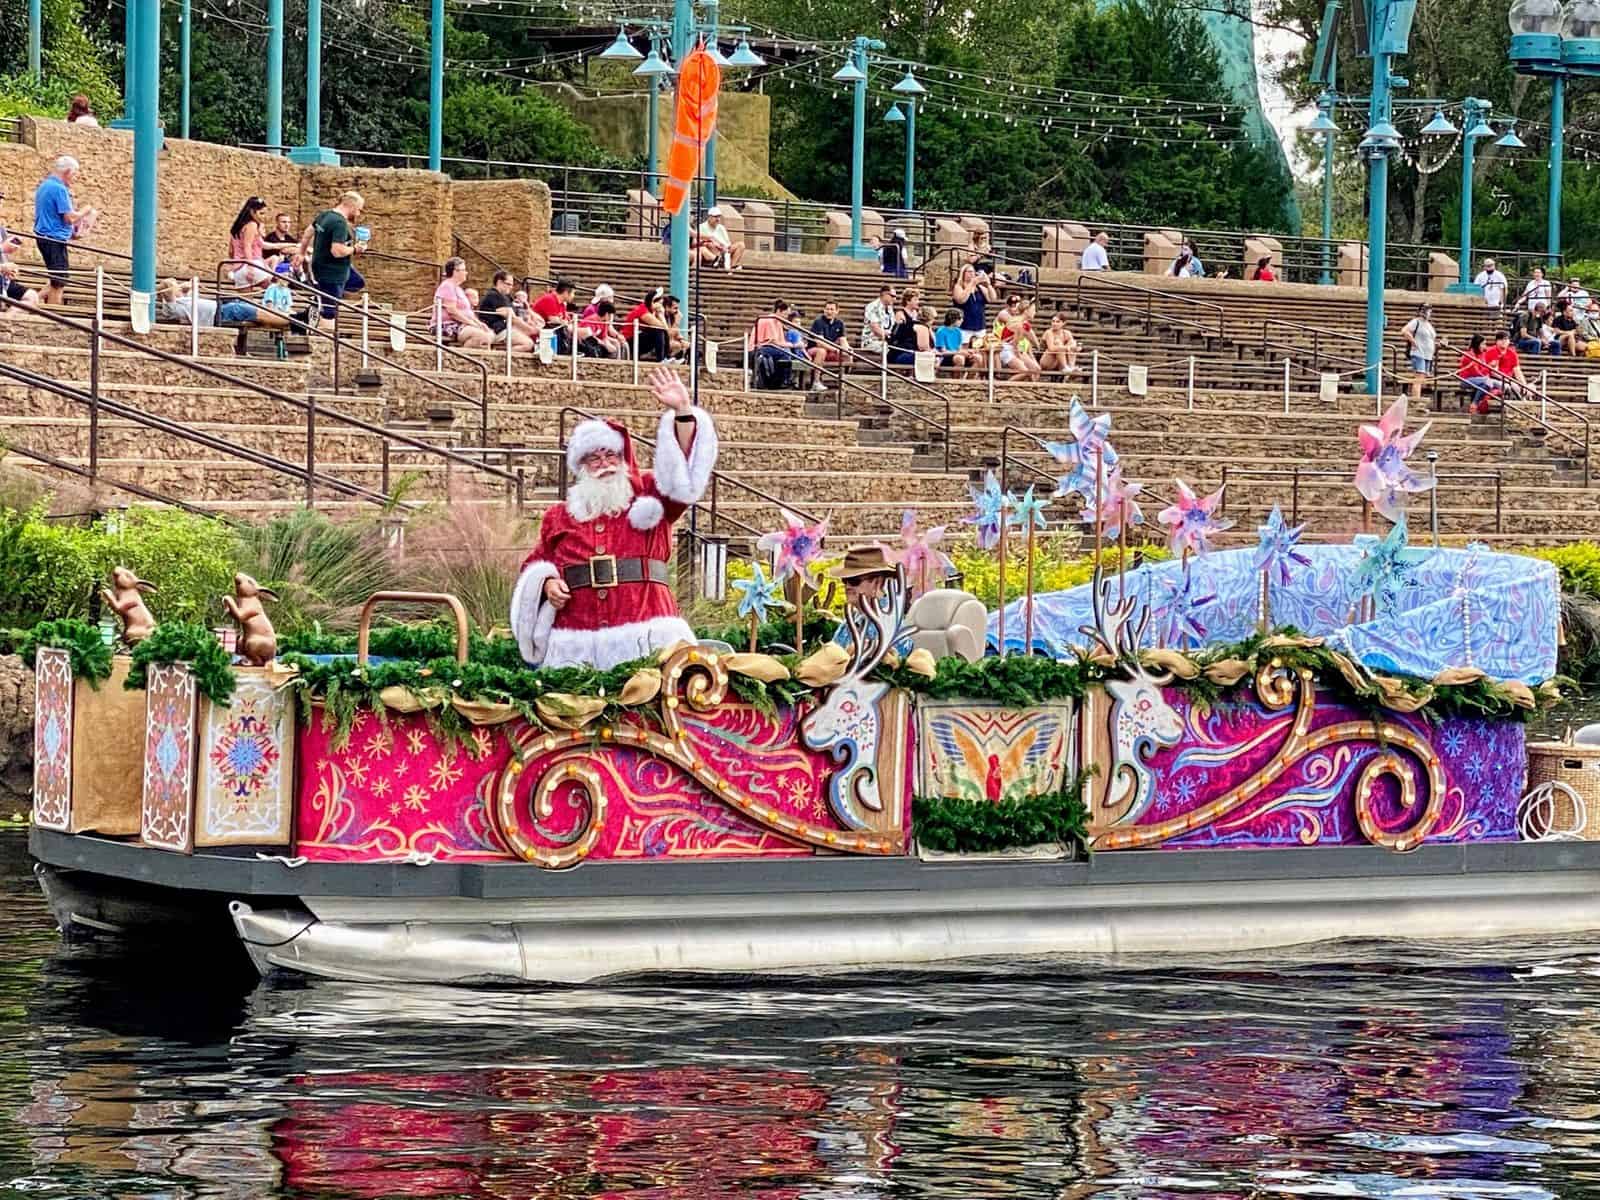 Where To Find Santa Claus At Disney World For The 2021 Holiday Season